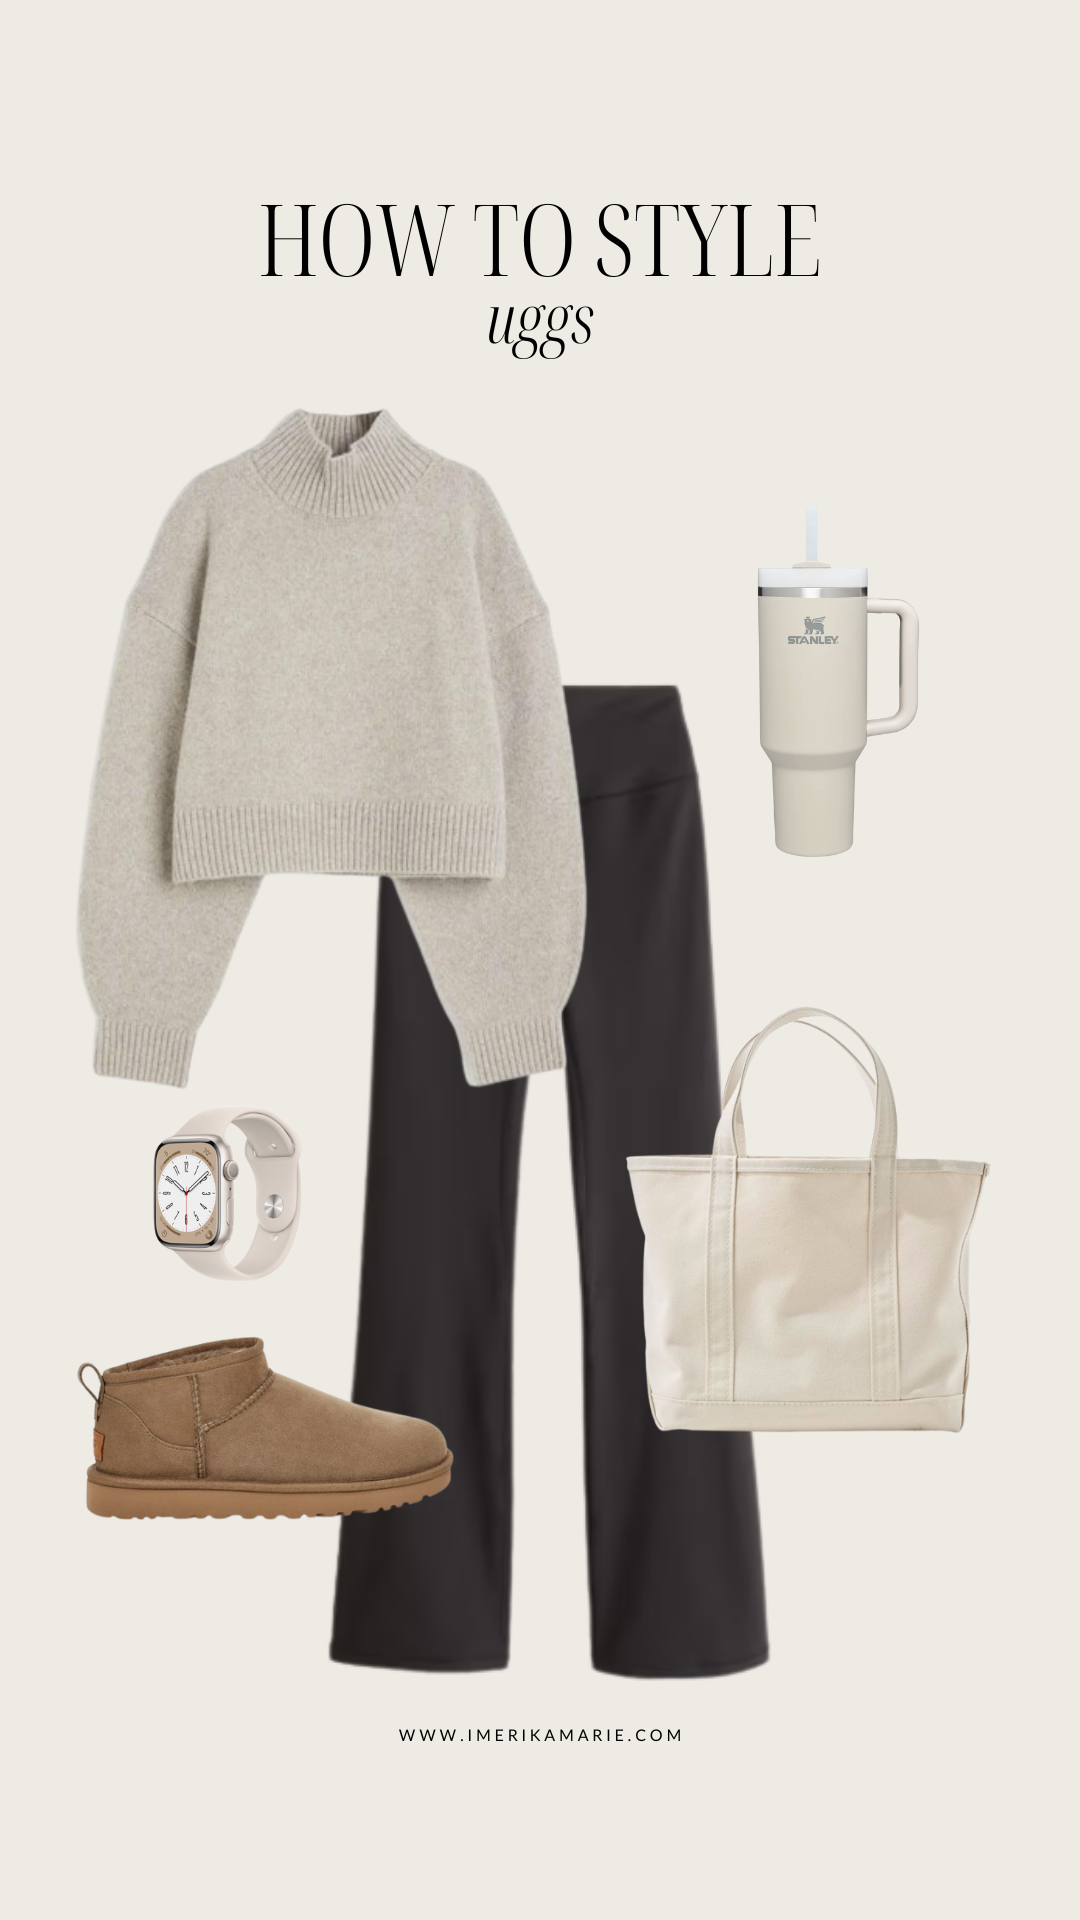 10 Ways to Style Uggs This Fall